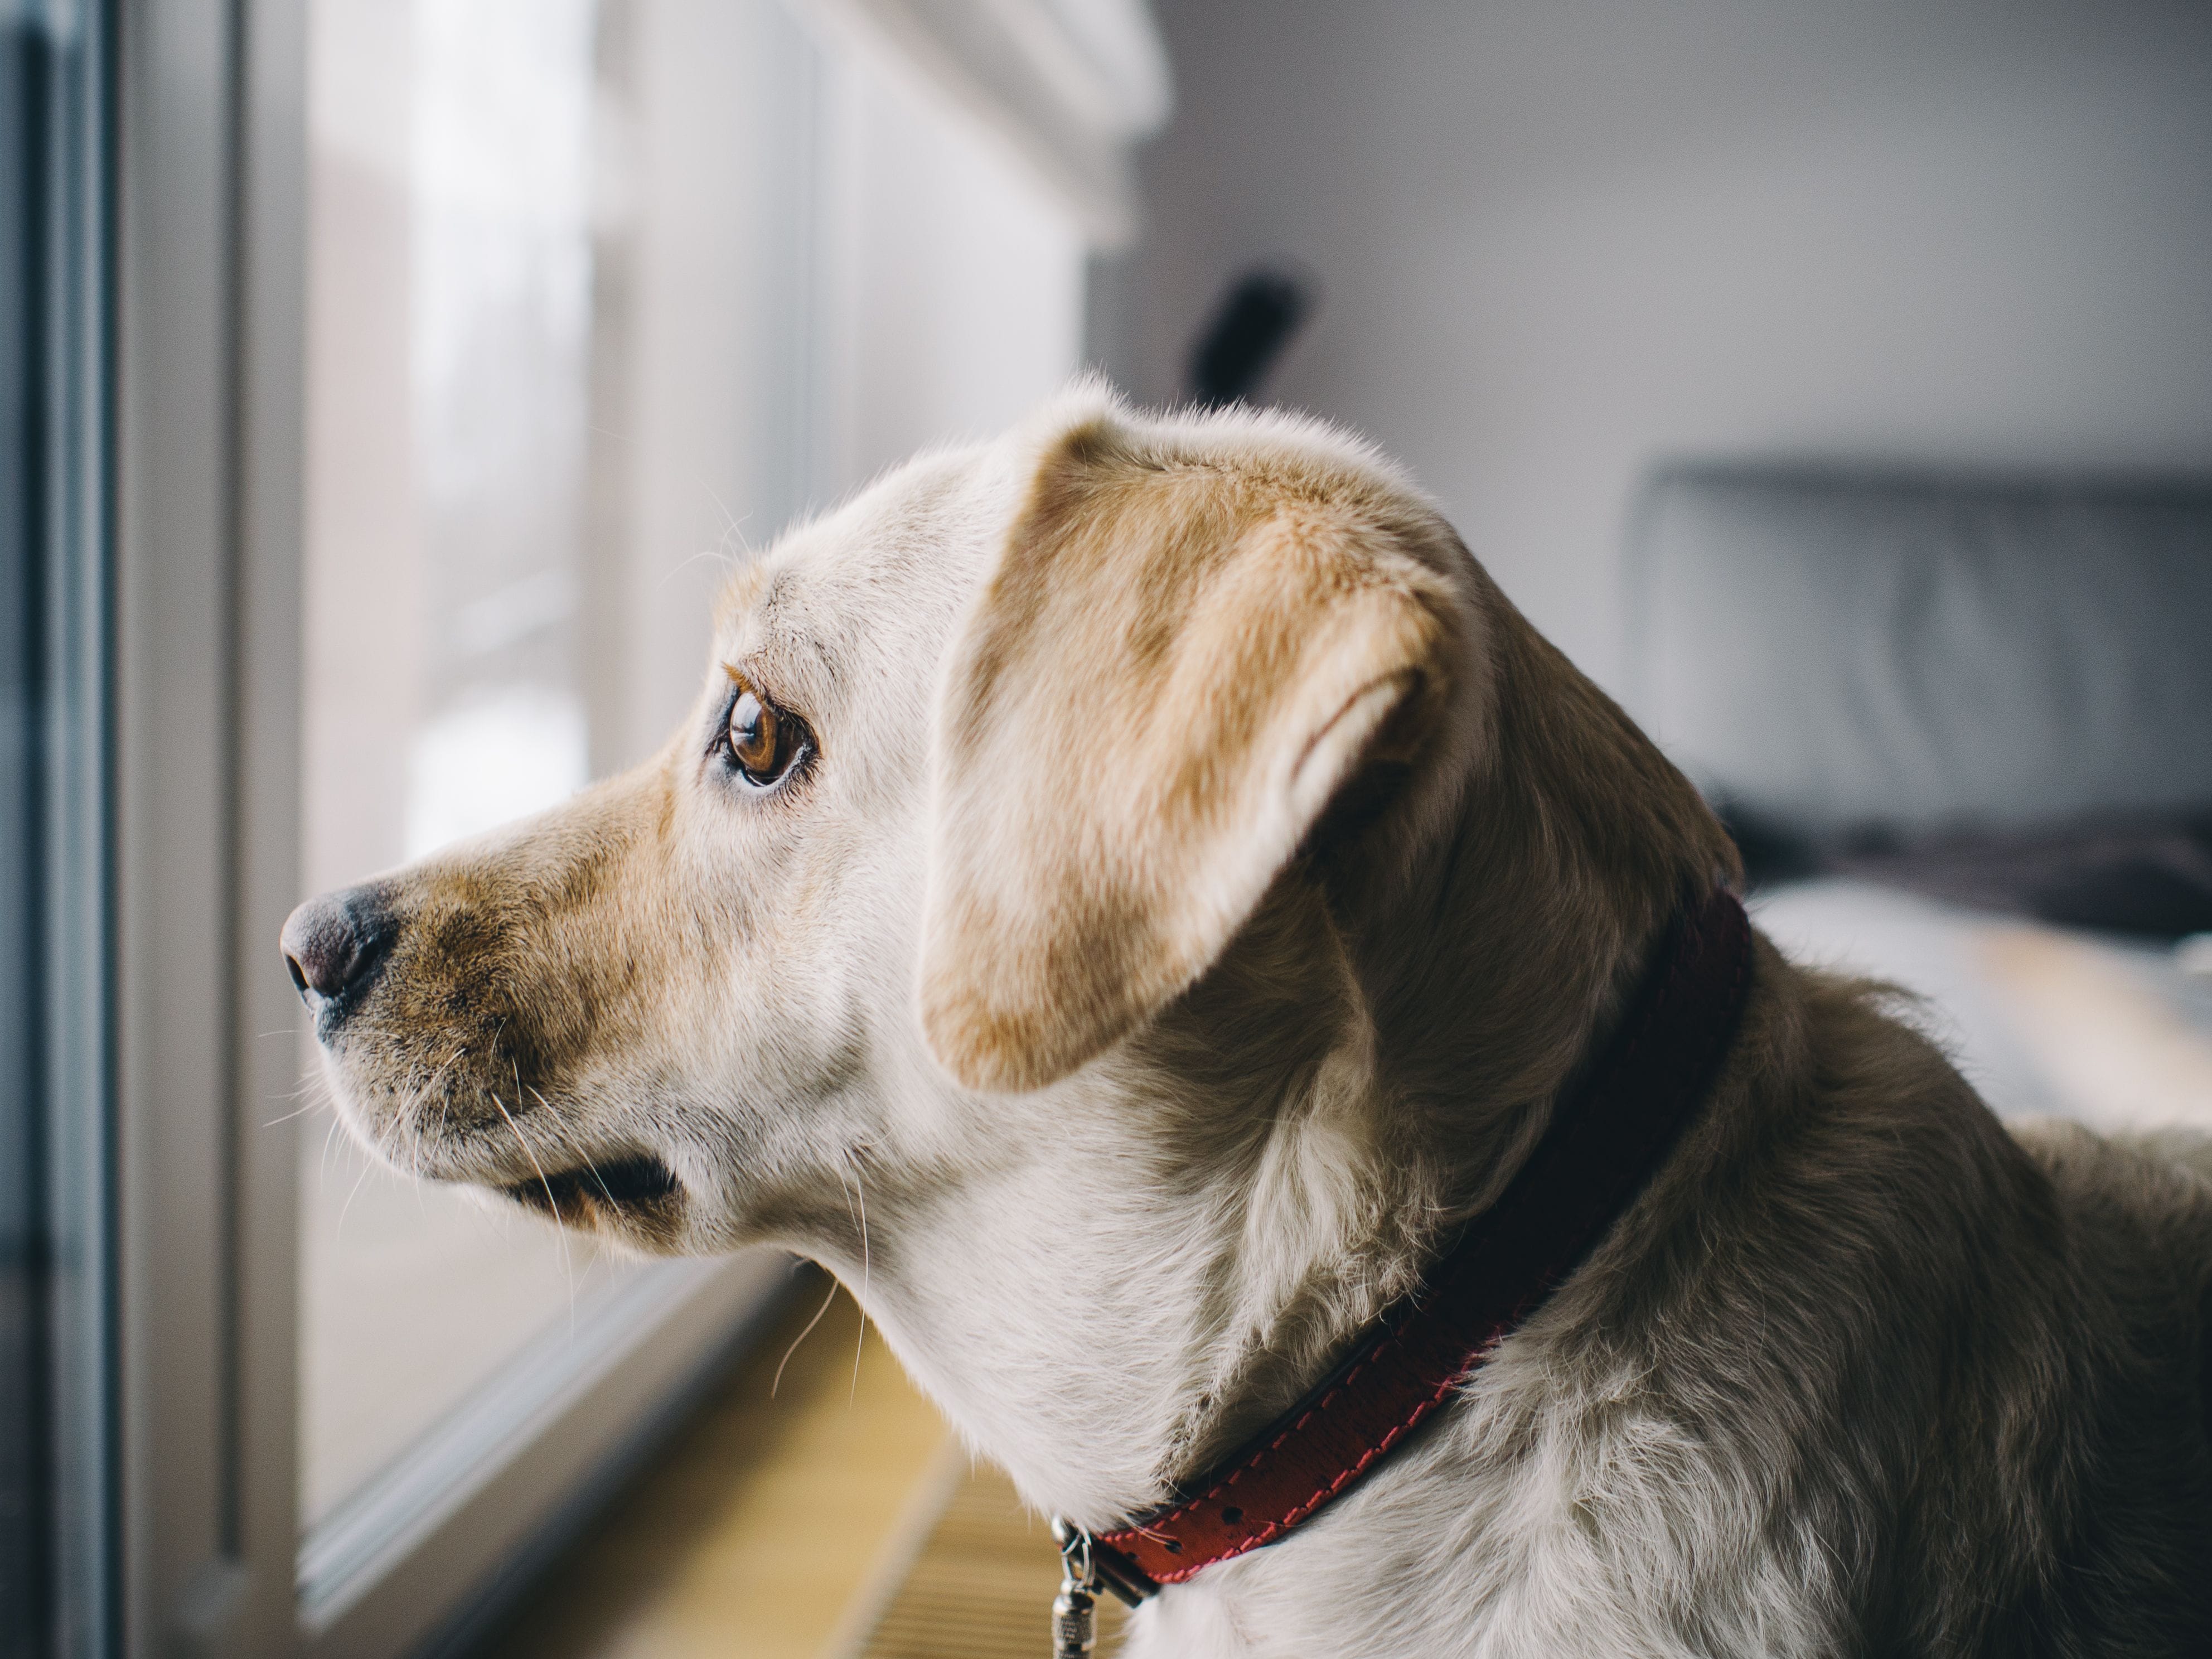 6 Supplies to Help Your Dog With Separation Anxiety